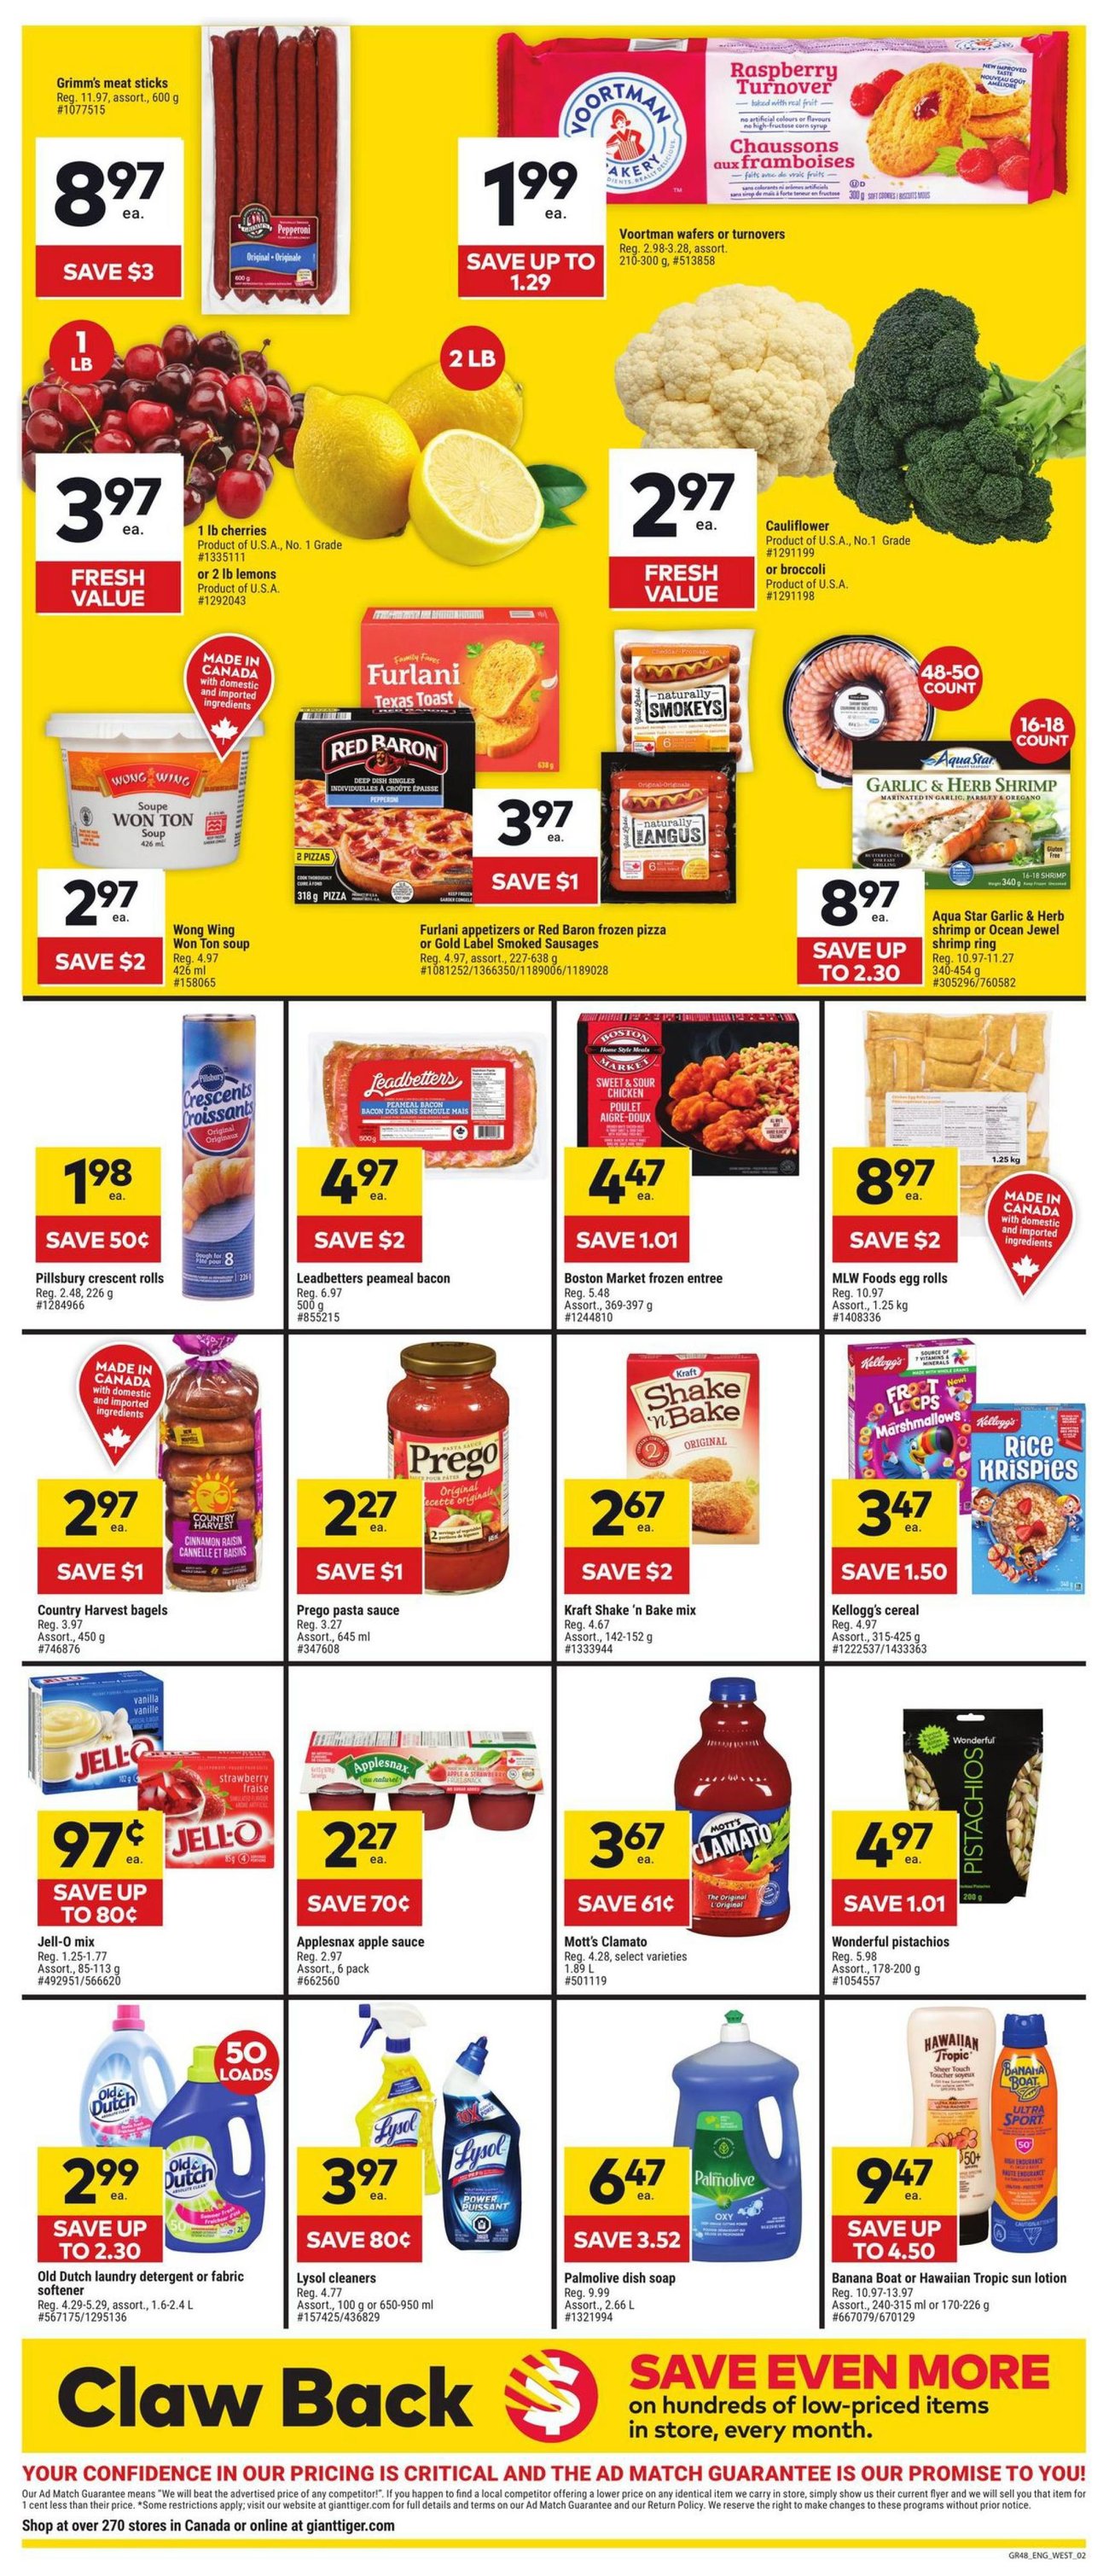 Giant Tiger - Western Canada - Weekly Flyer Specials - Page 2